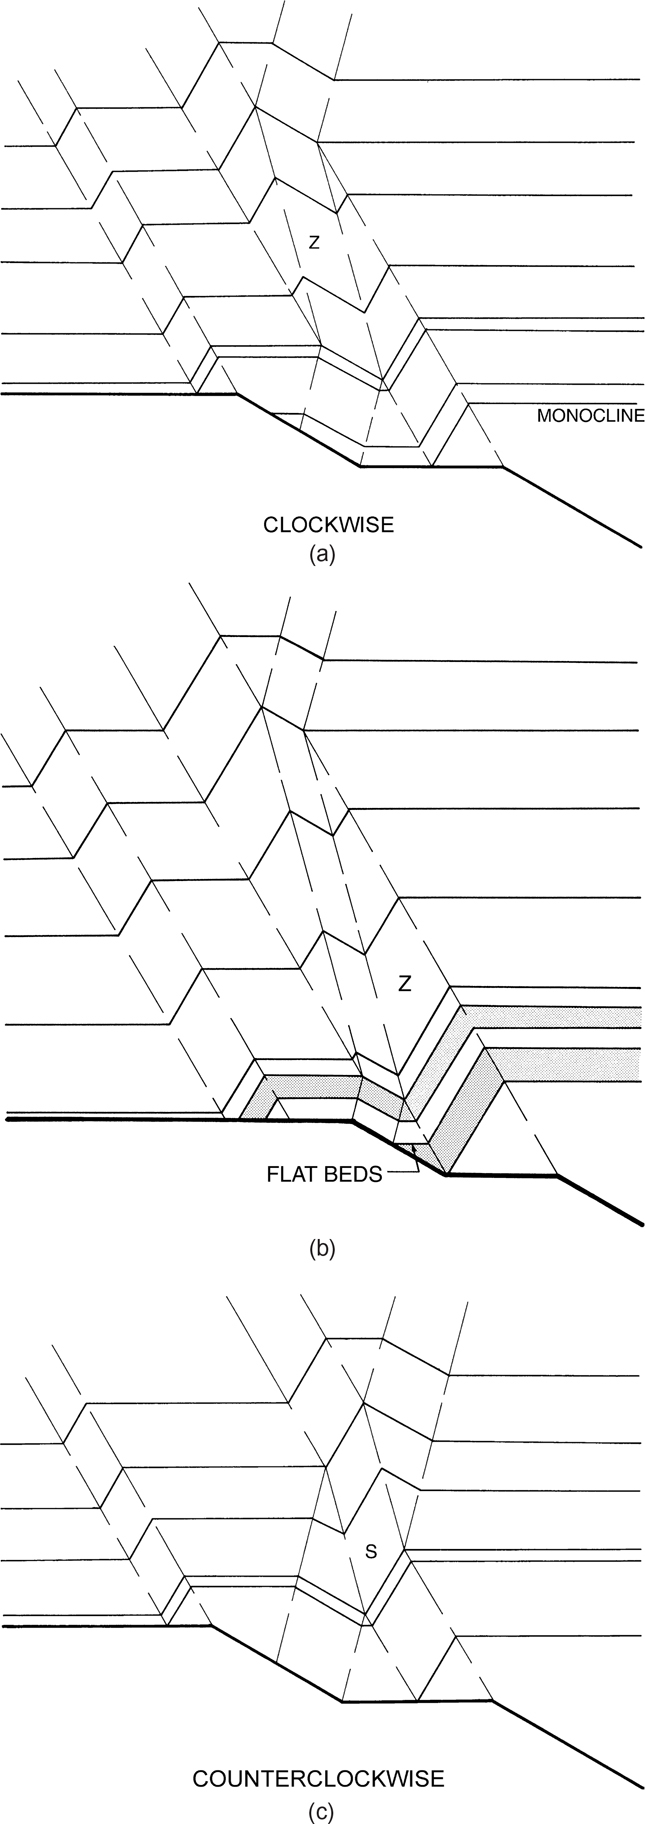 Figures and b show the interference structures of monoclines and flat beds respectively for clockwise deformation and increasing slip. Figure c shows the structure for counterclockwise shear.